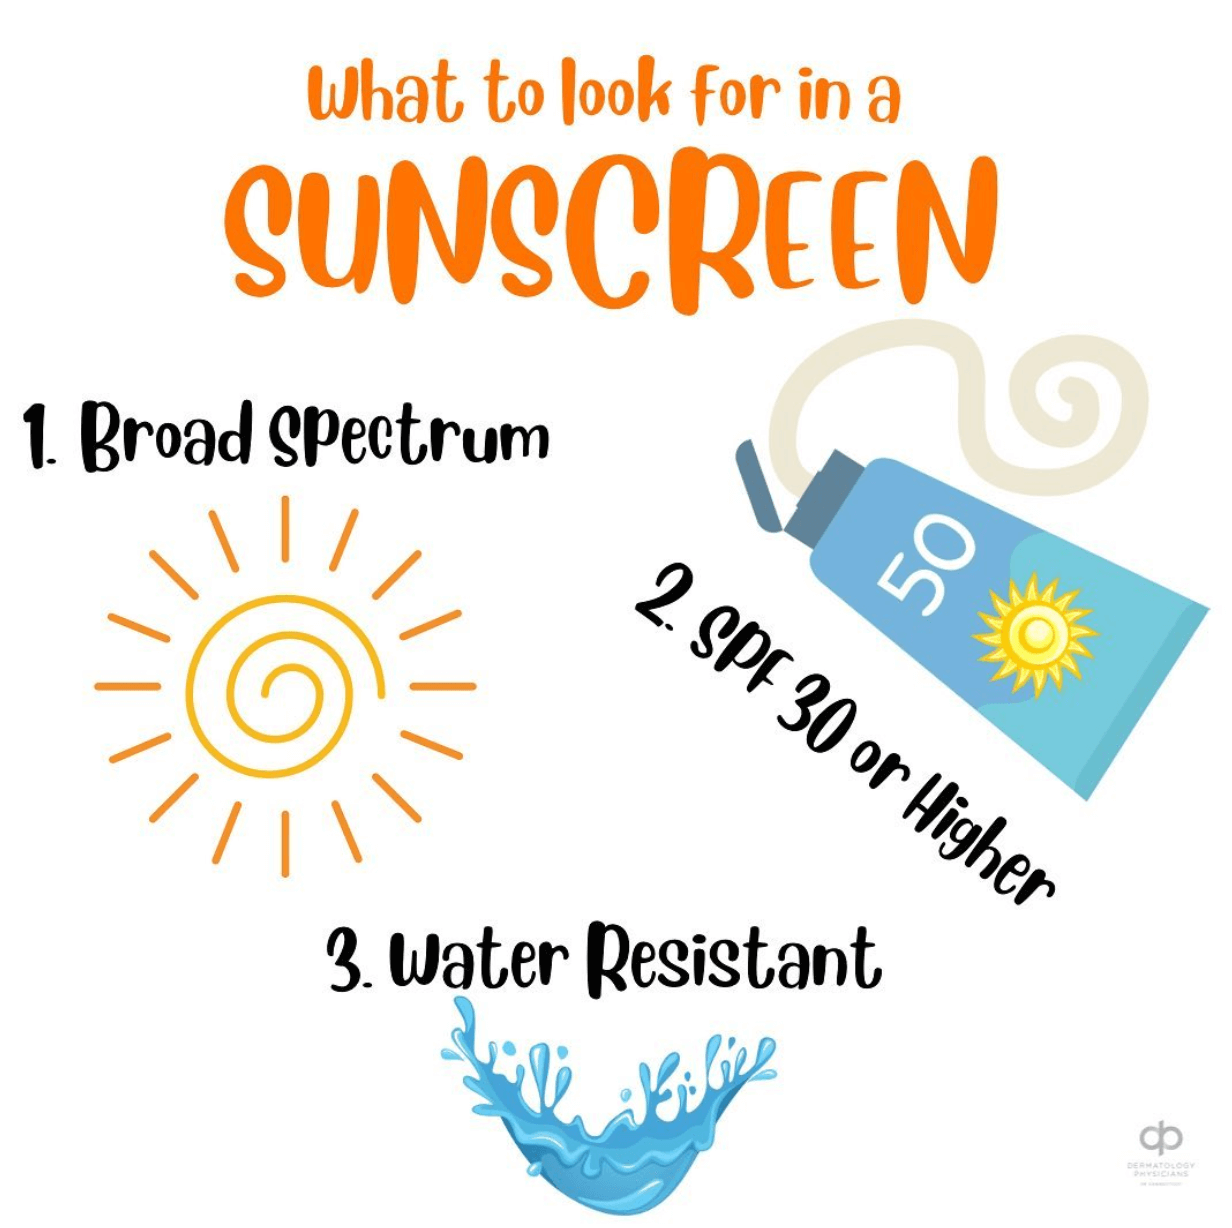 What to look for in sunscreen